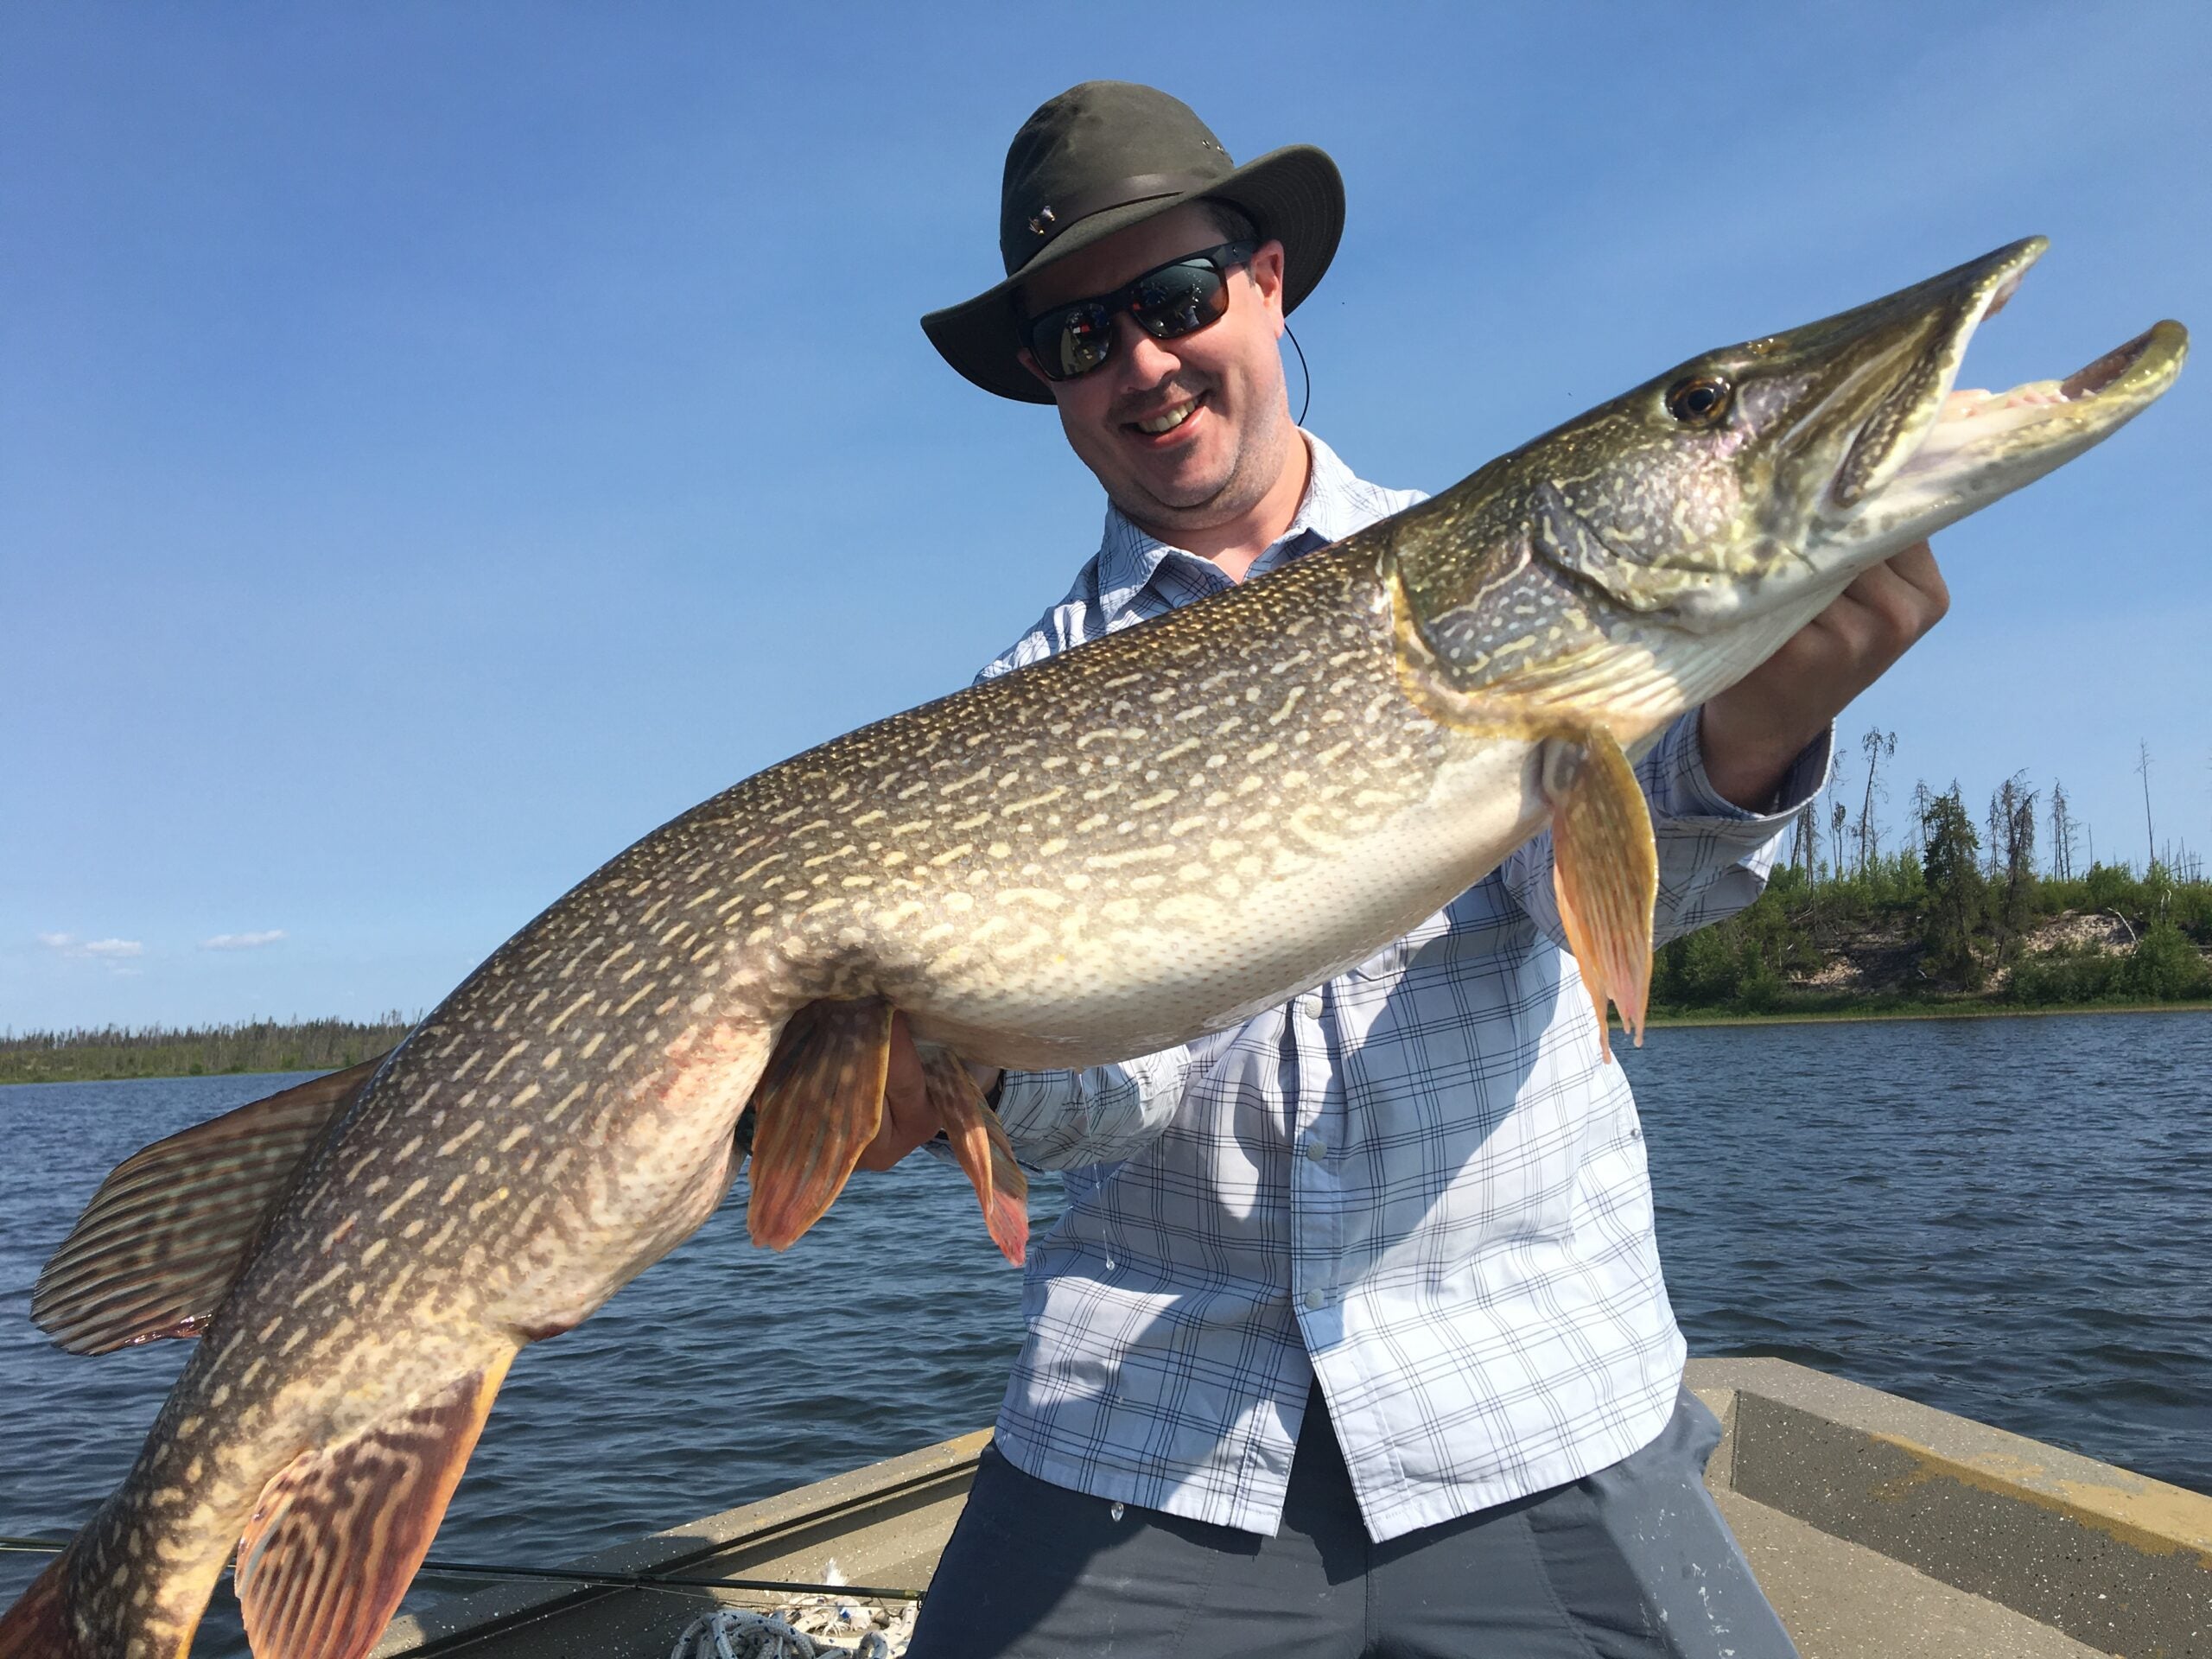 lllᐅ Best bait for (northern) pike ᐅ The ultimate guide【2021